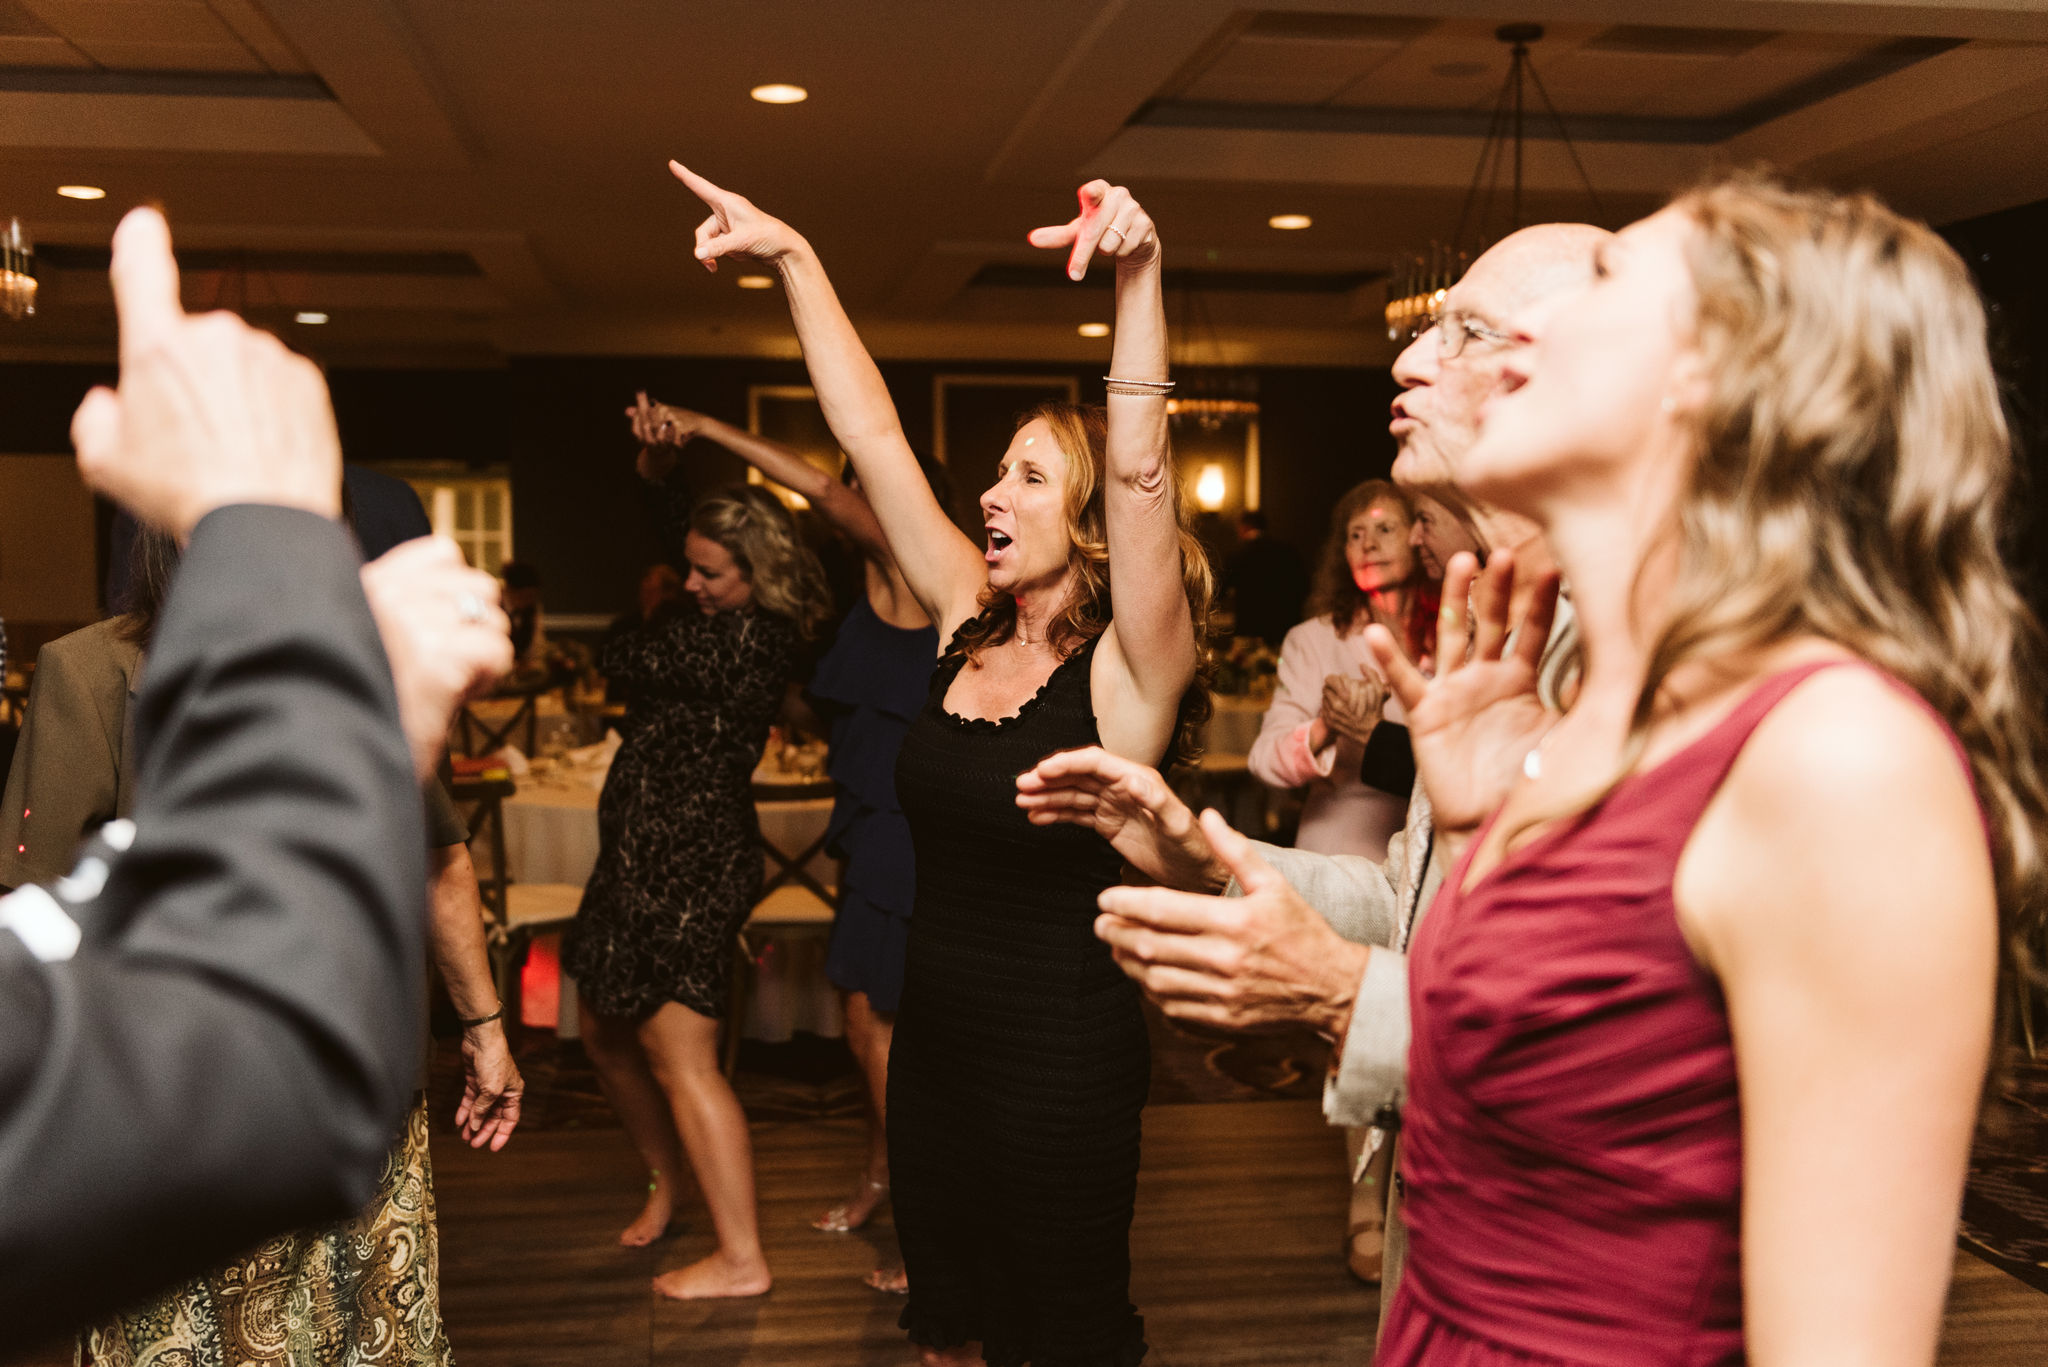  Phoenix Maryland, Baltimore Wedding Photographer, Eagle’s Nest Country Club, Classic, Romantic, Family Cheering and Singing at Reception 